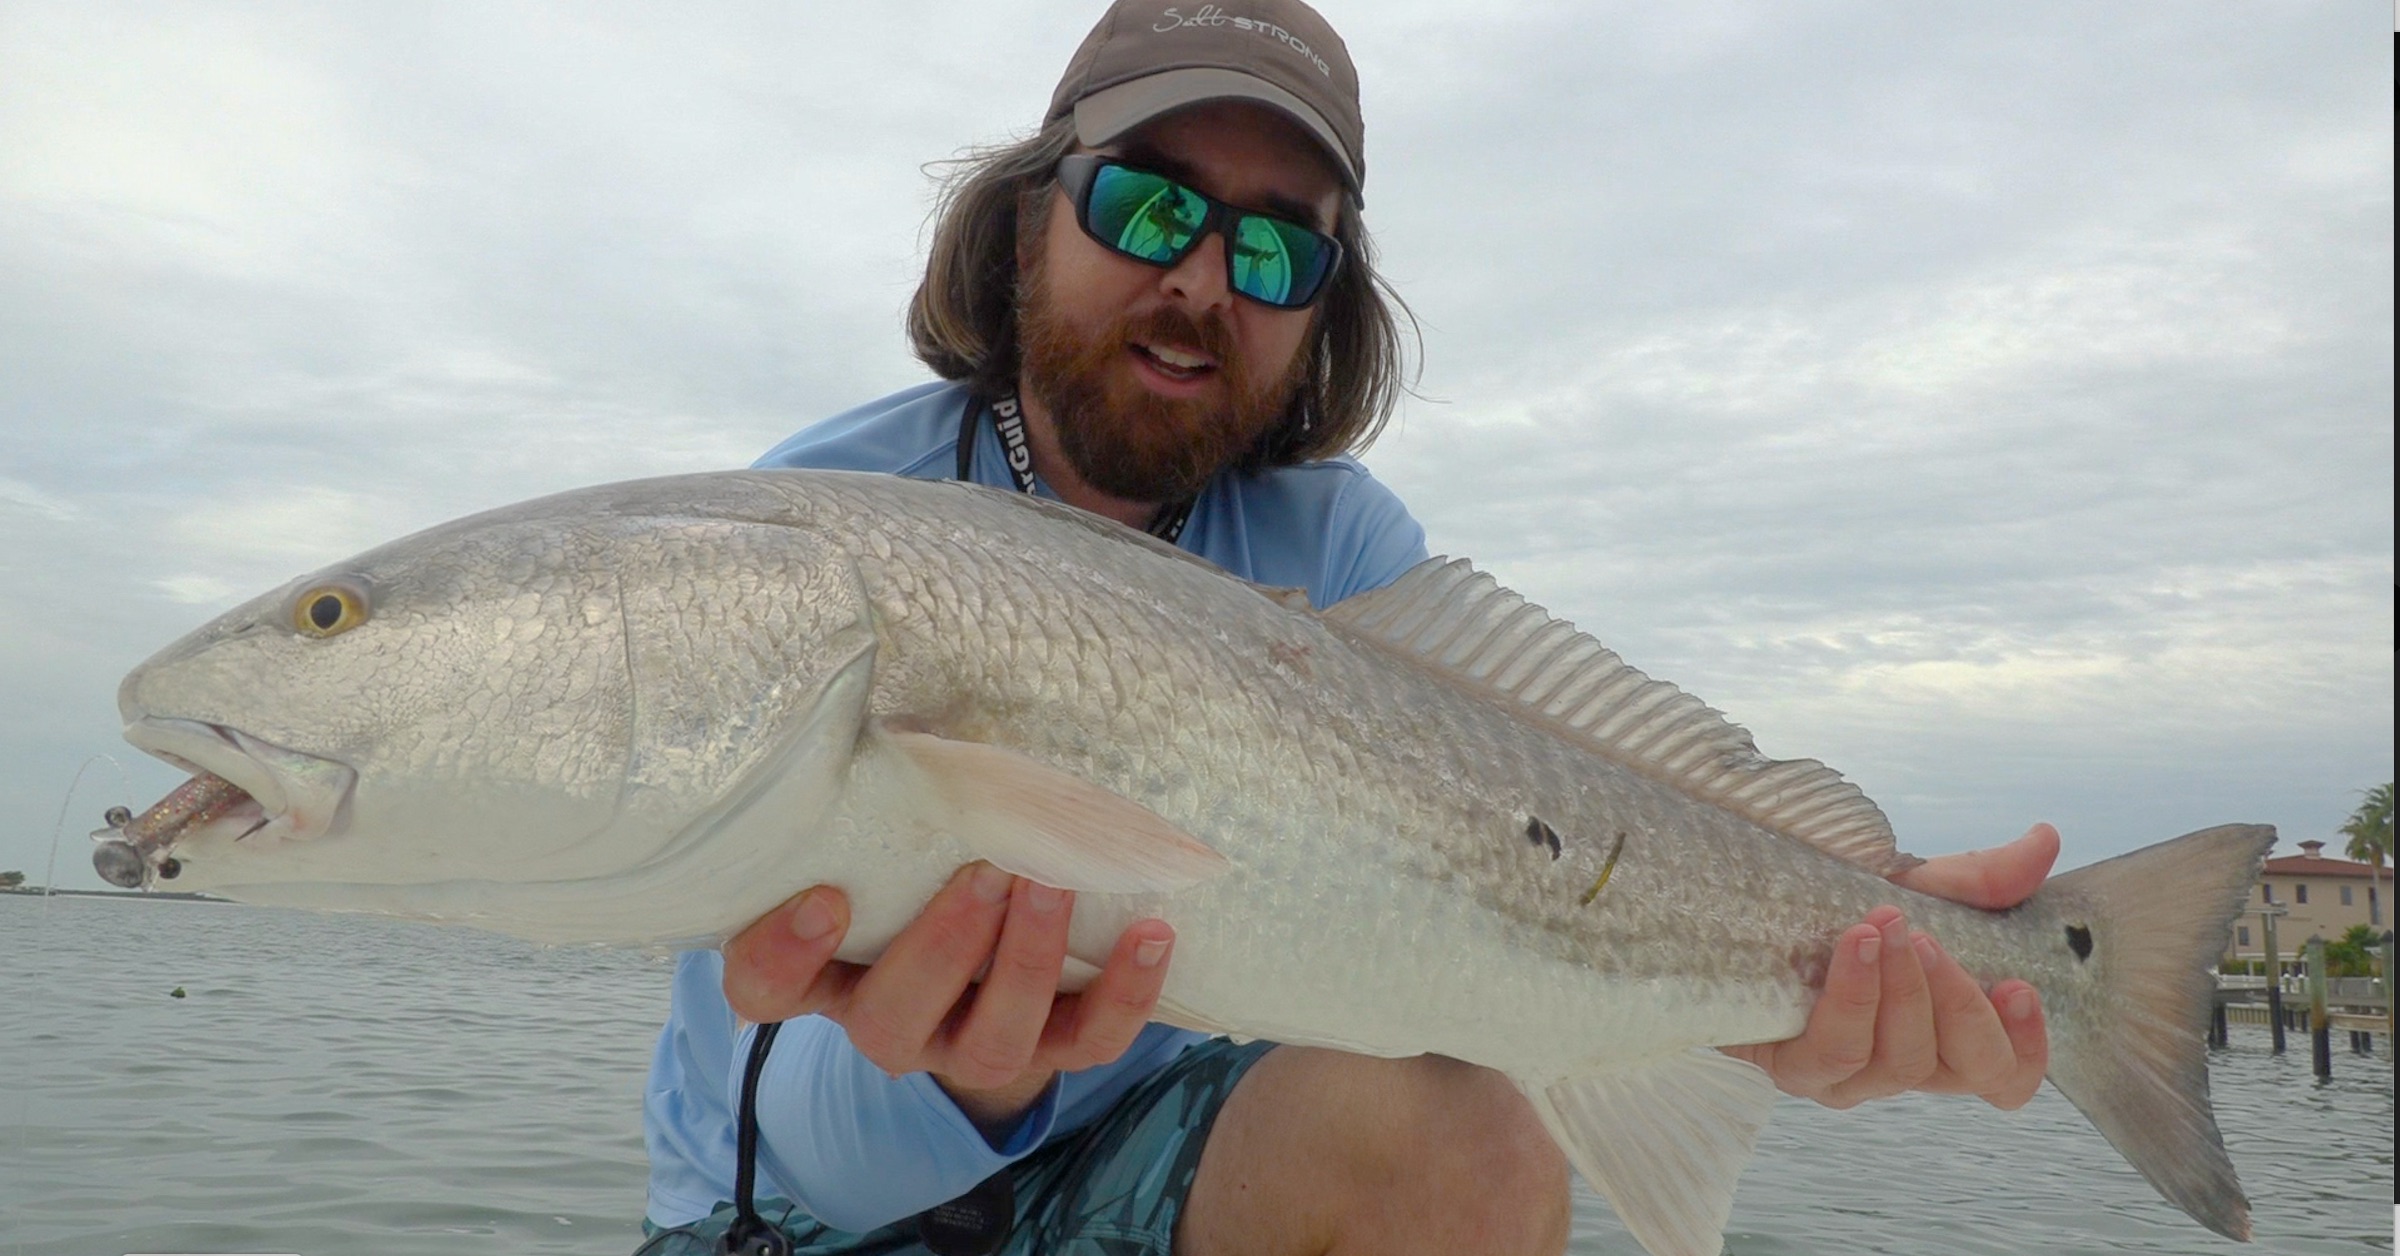 Do Rattling Lures Work Better in Saltwater? - Texas Fish & Game